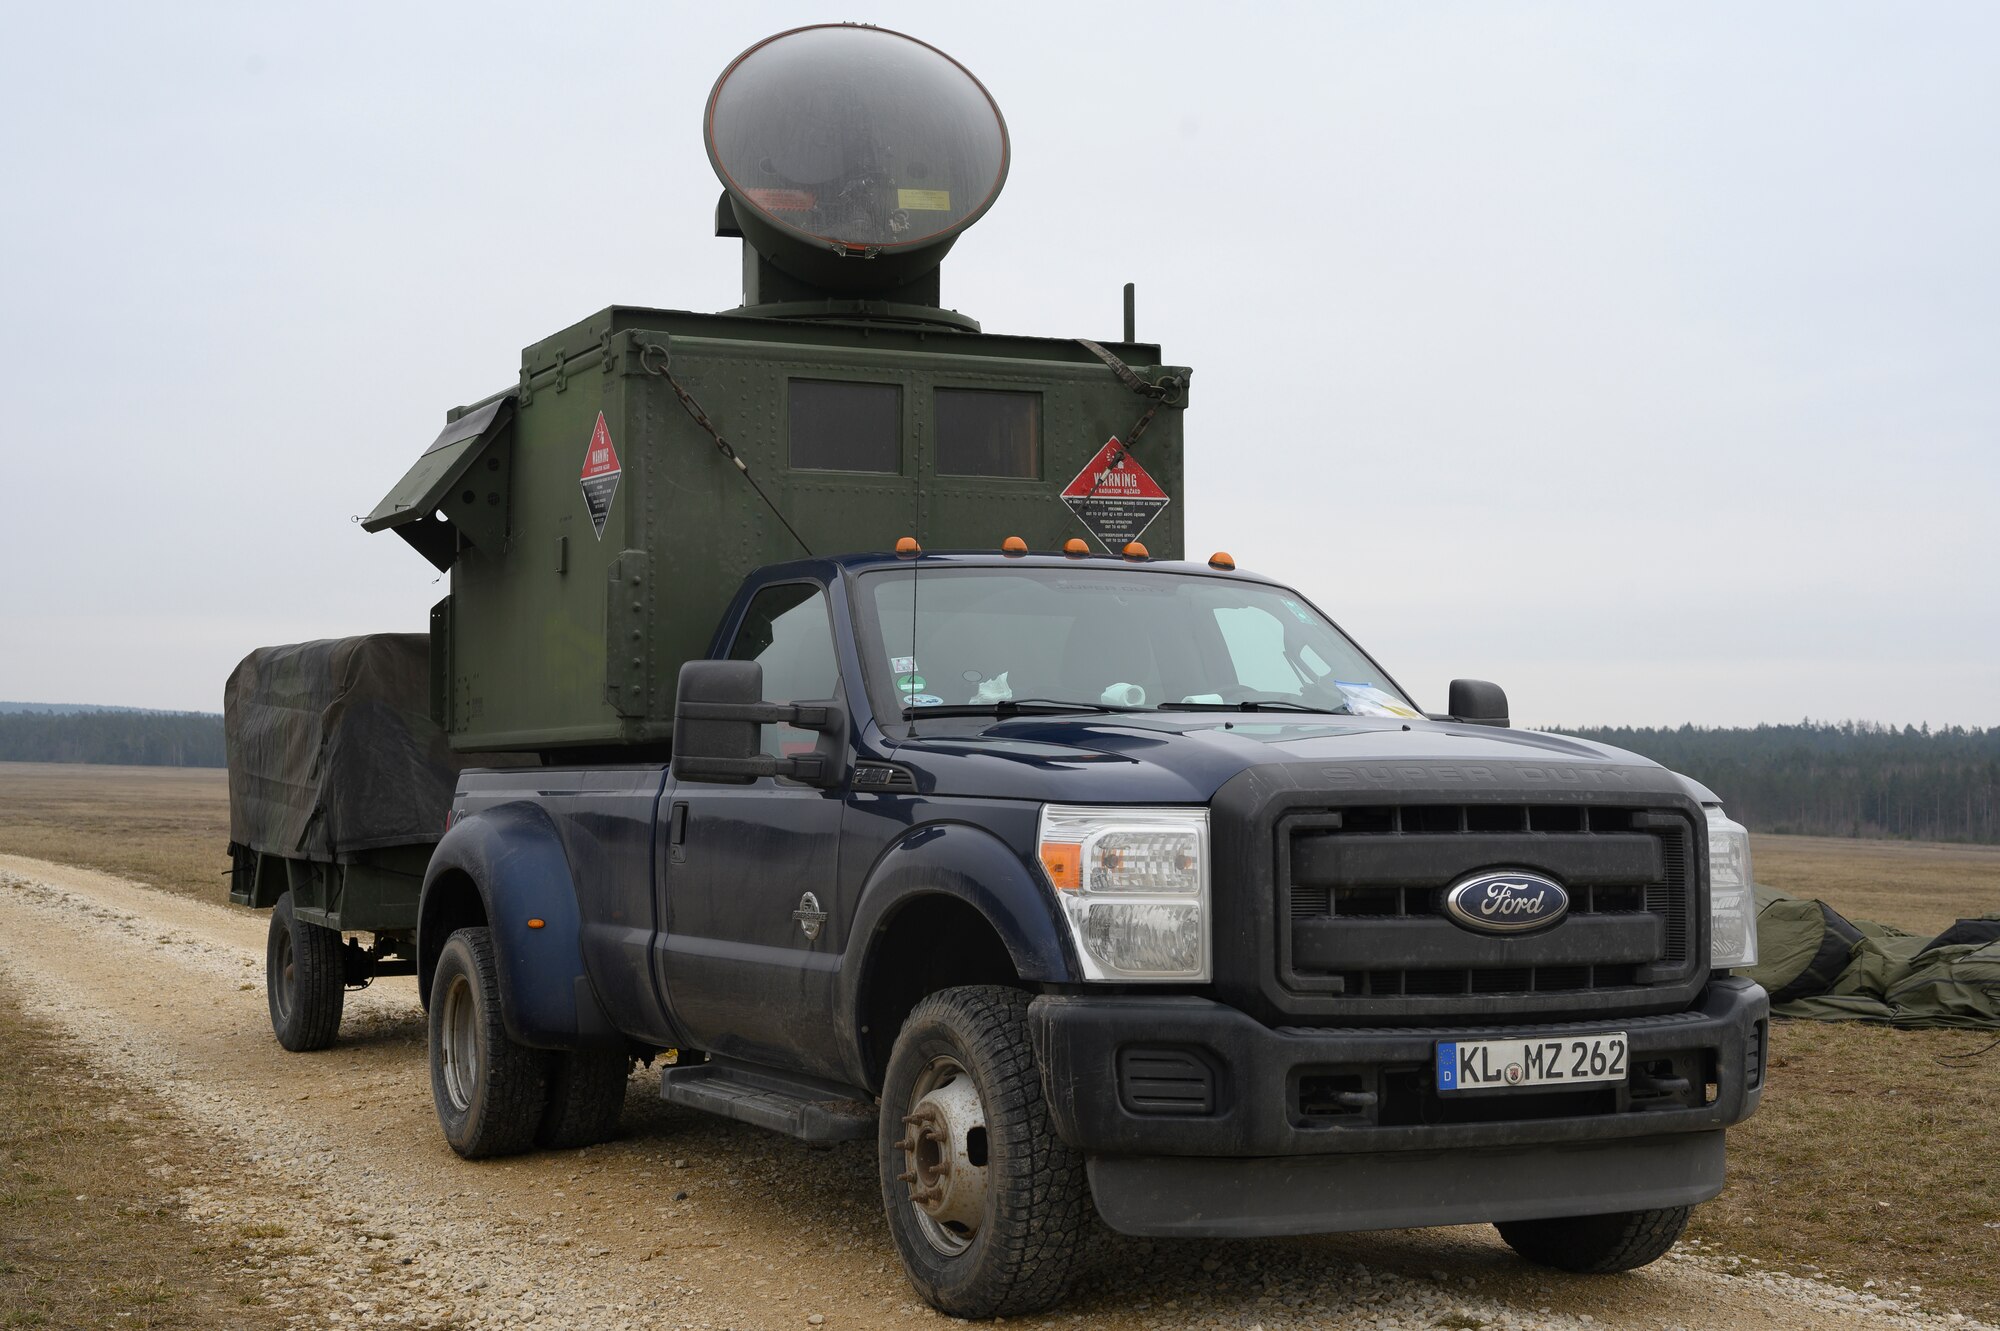 A surface-to-air-threat emitter sits on a government vehicle.